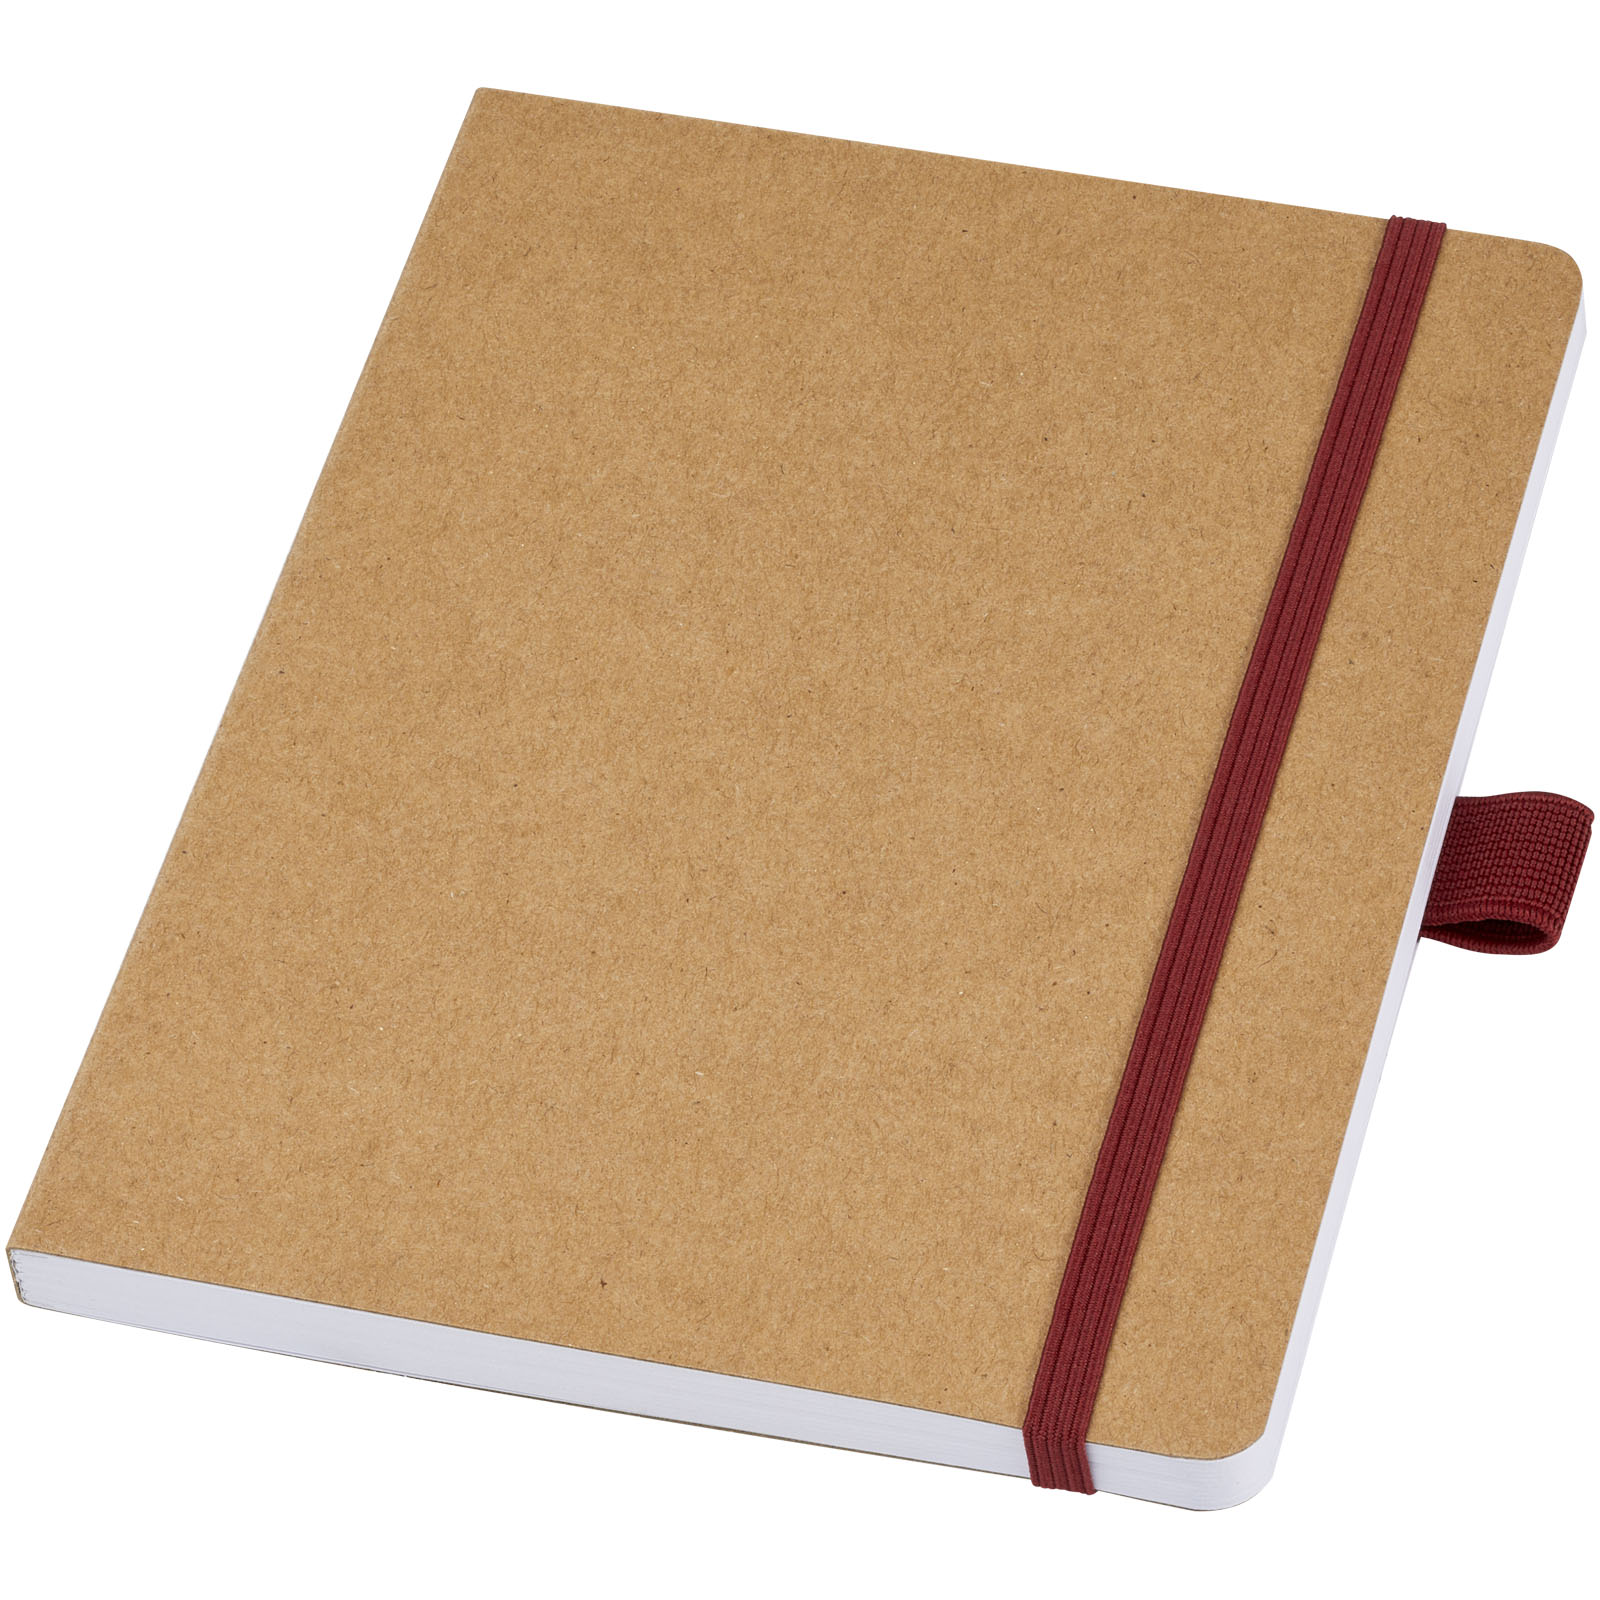 Advertising Soft cover notebooks - Berk recycled paper notebook